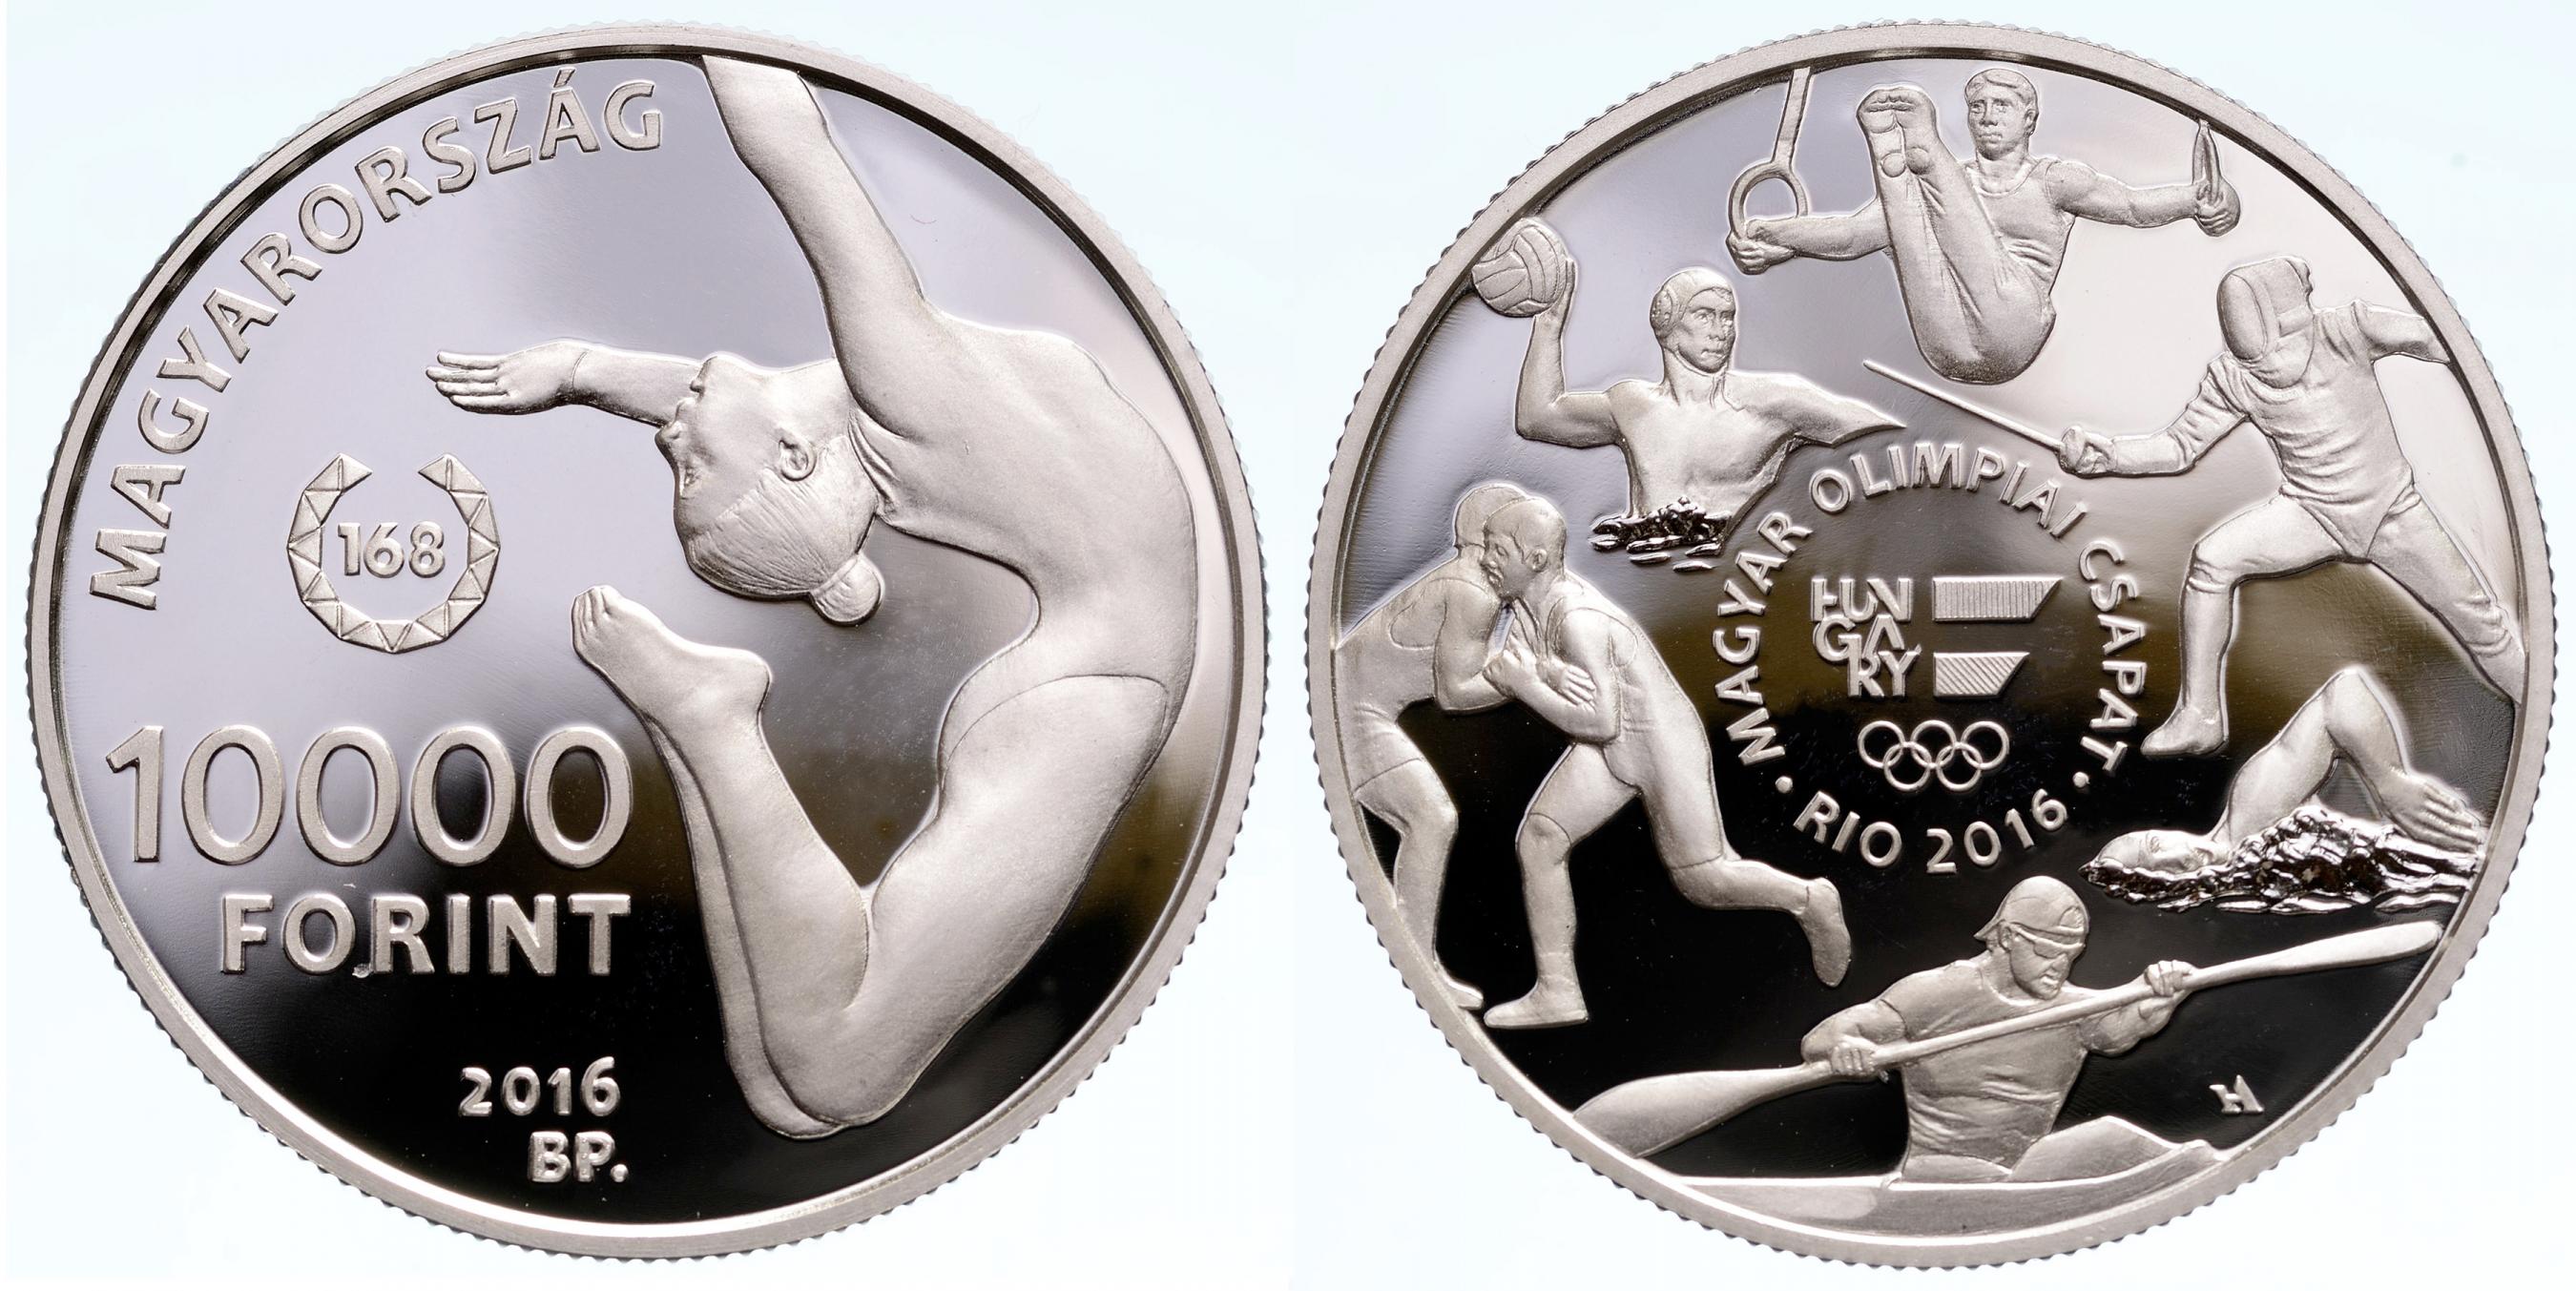 Hungary 10,000 Forint 2016. Rio. Silver Proof